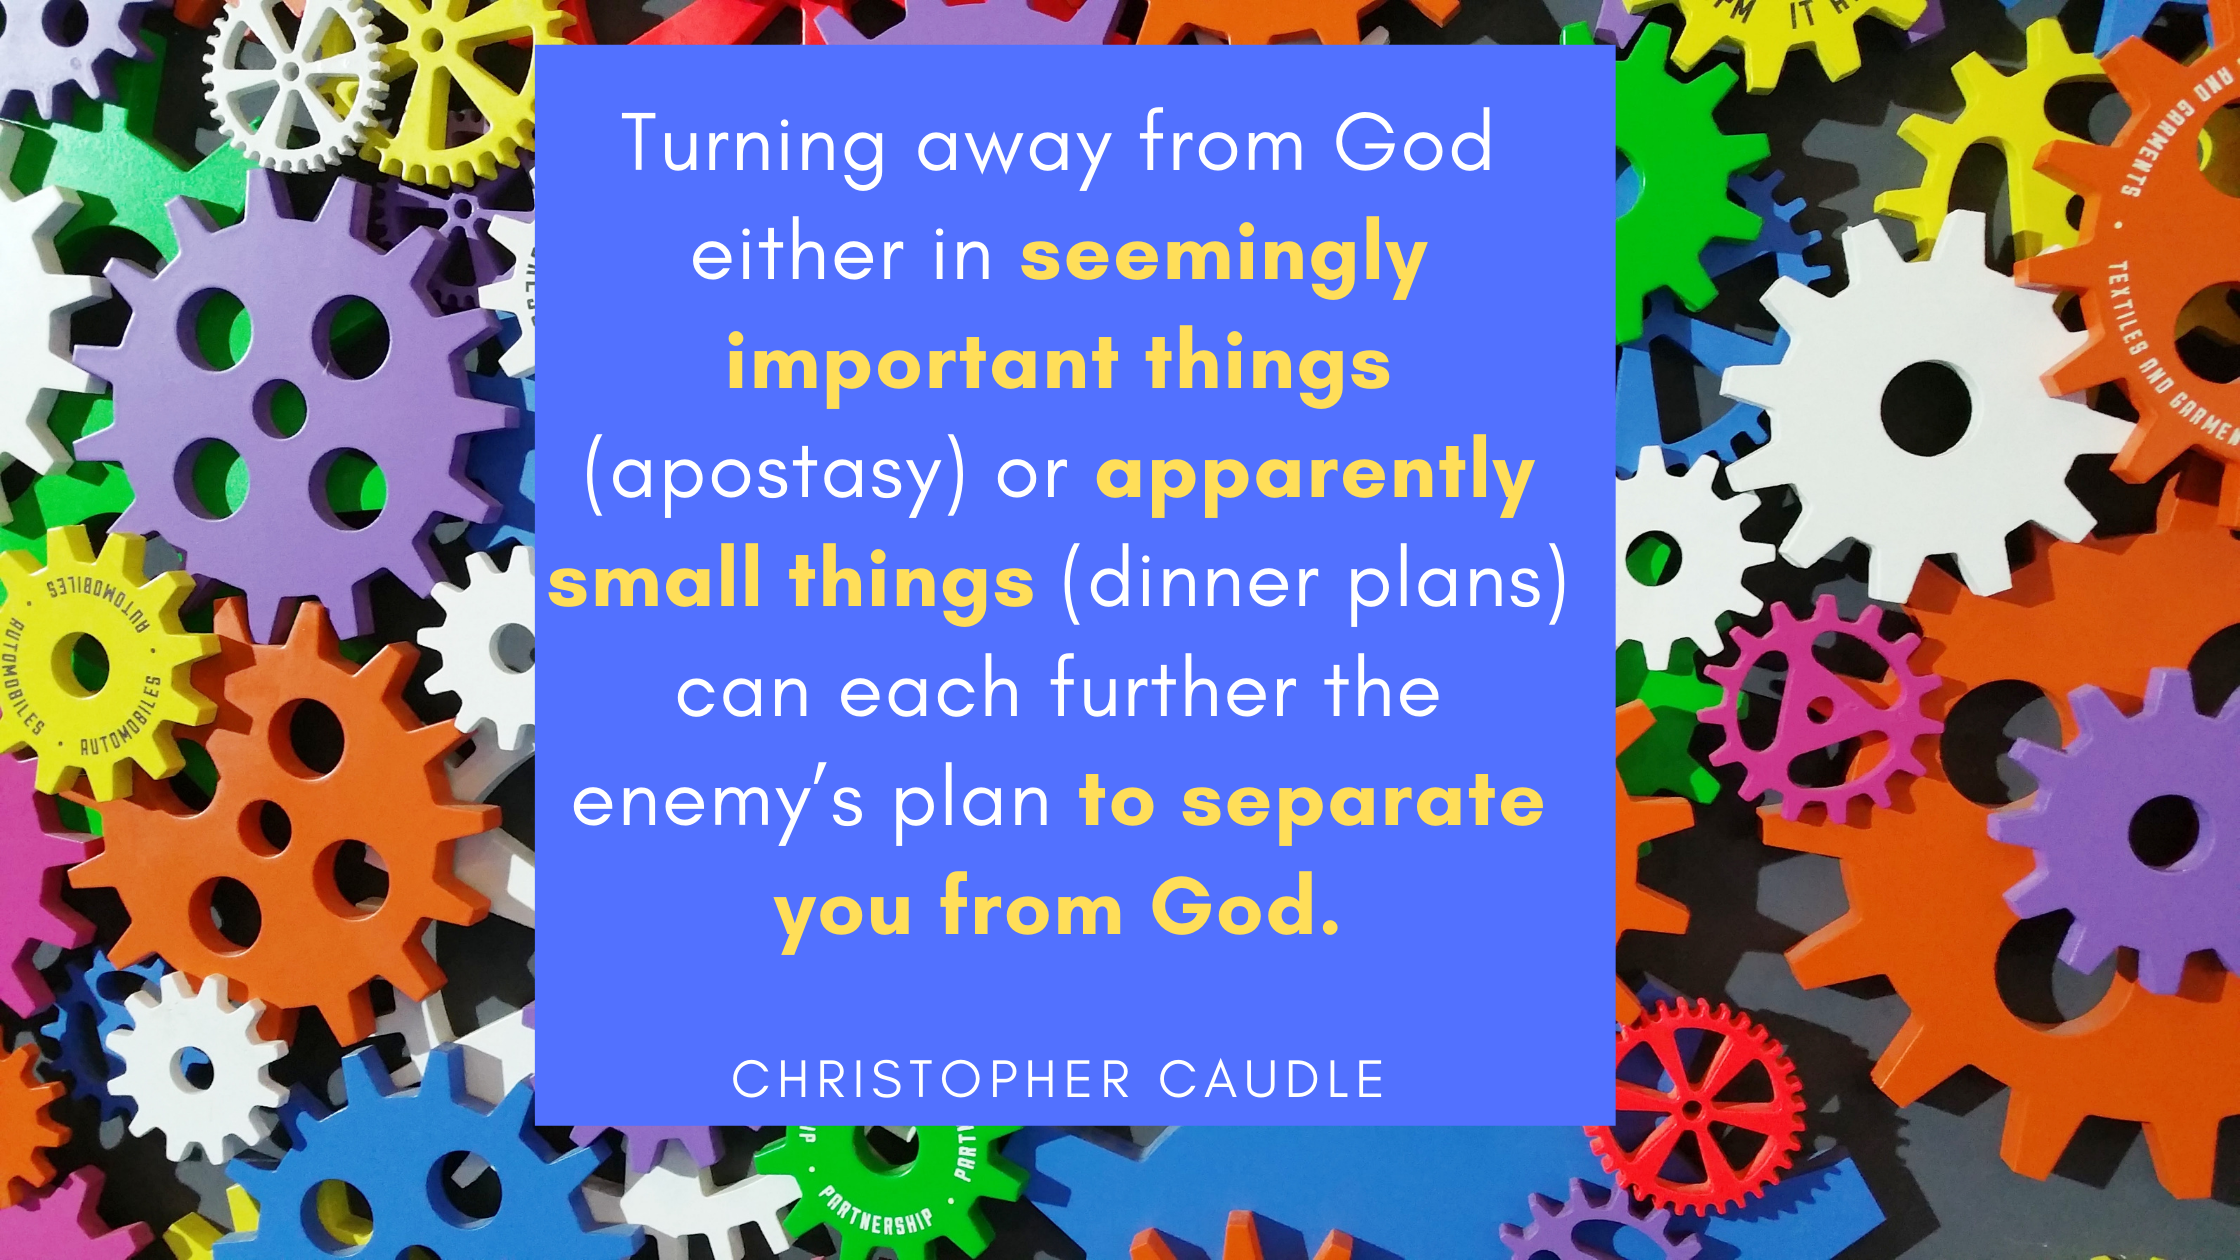 Turning away from God either in seemingly important things (apostasy) or apparently small things (dinner plans) can each further the enemy’s plan to s